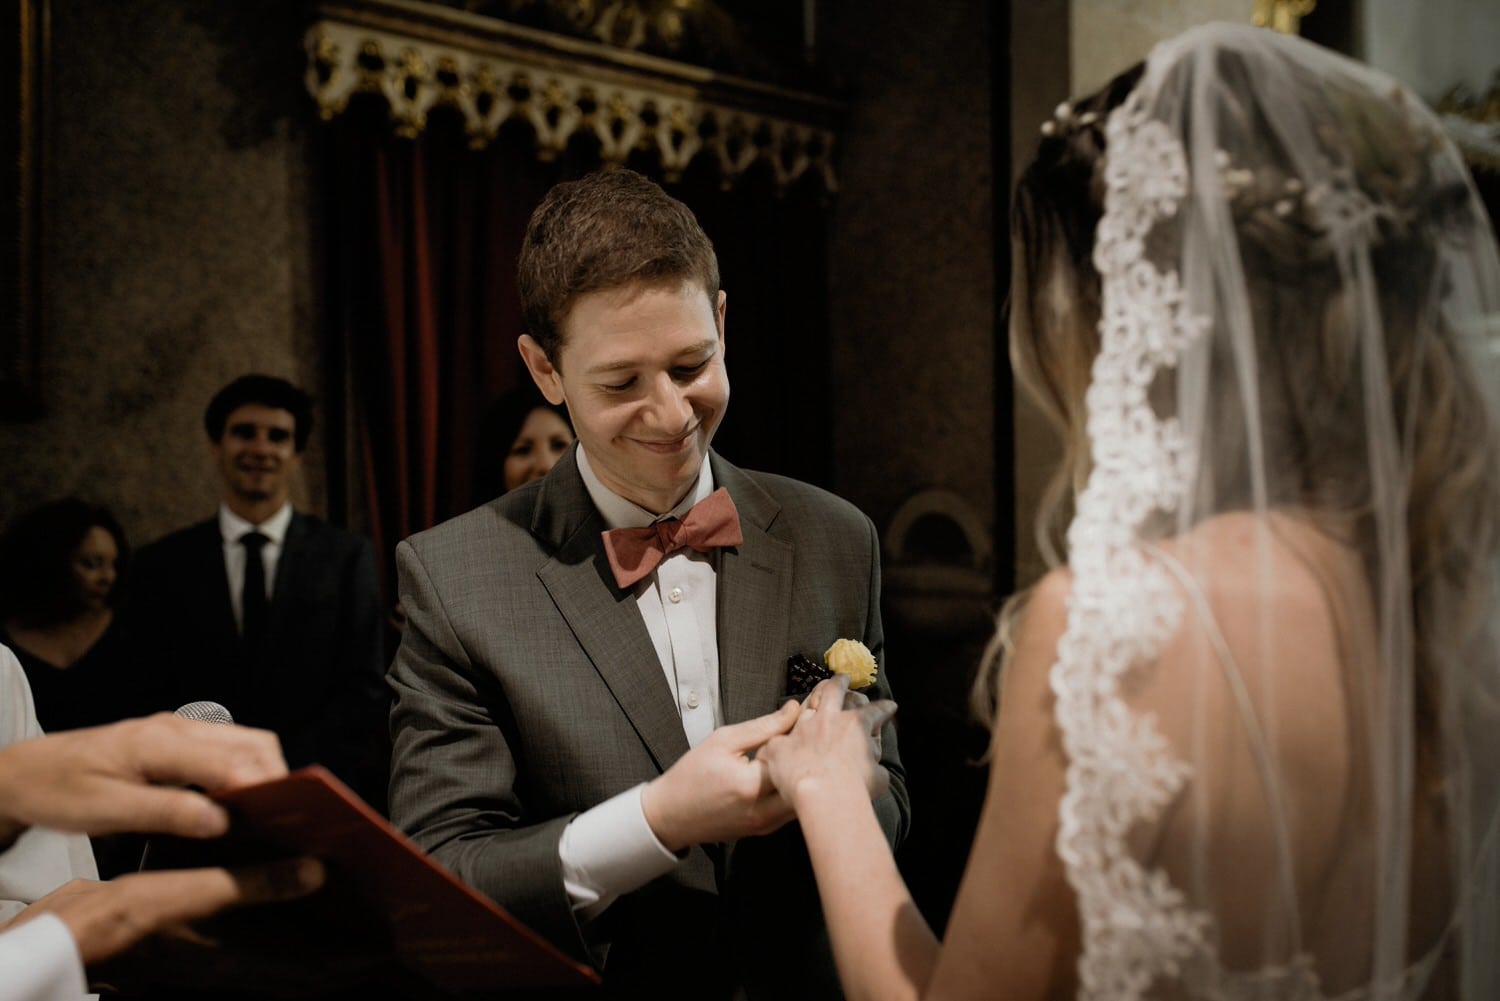 emotional groom putting the wedding ring on his bride's finger